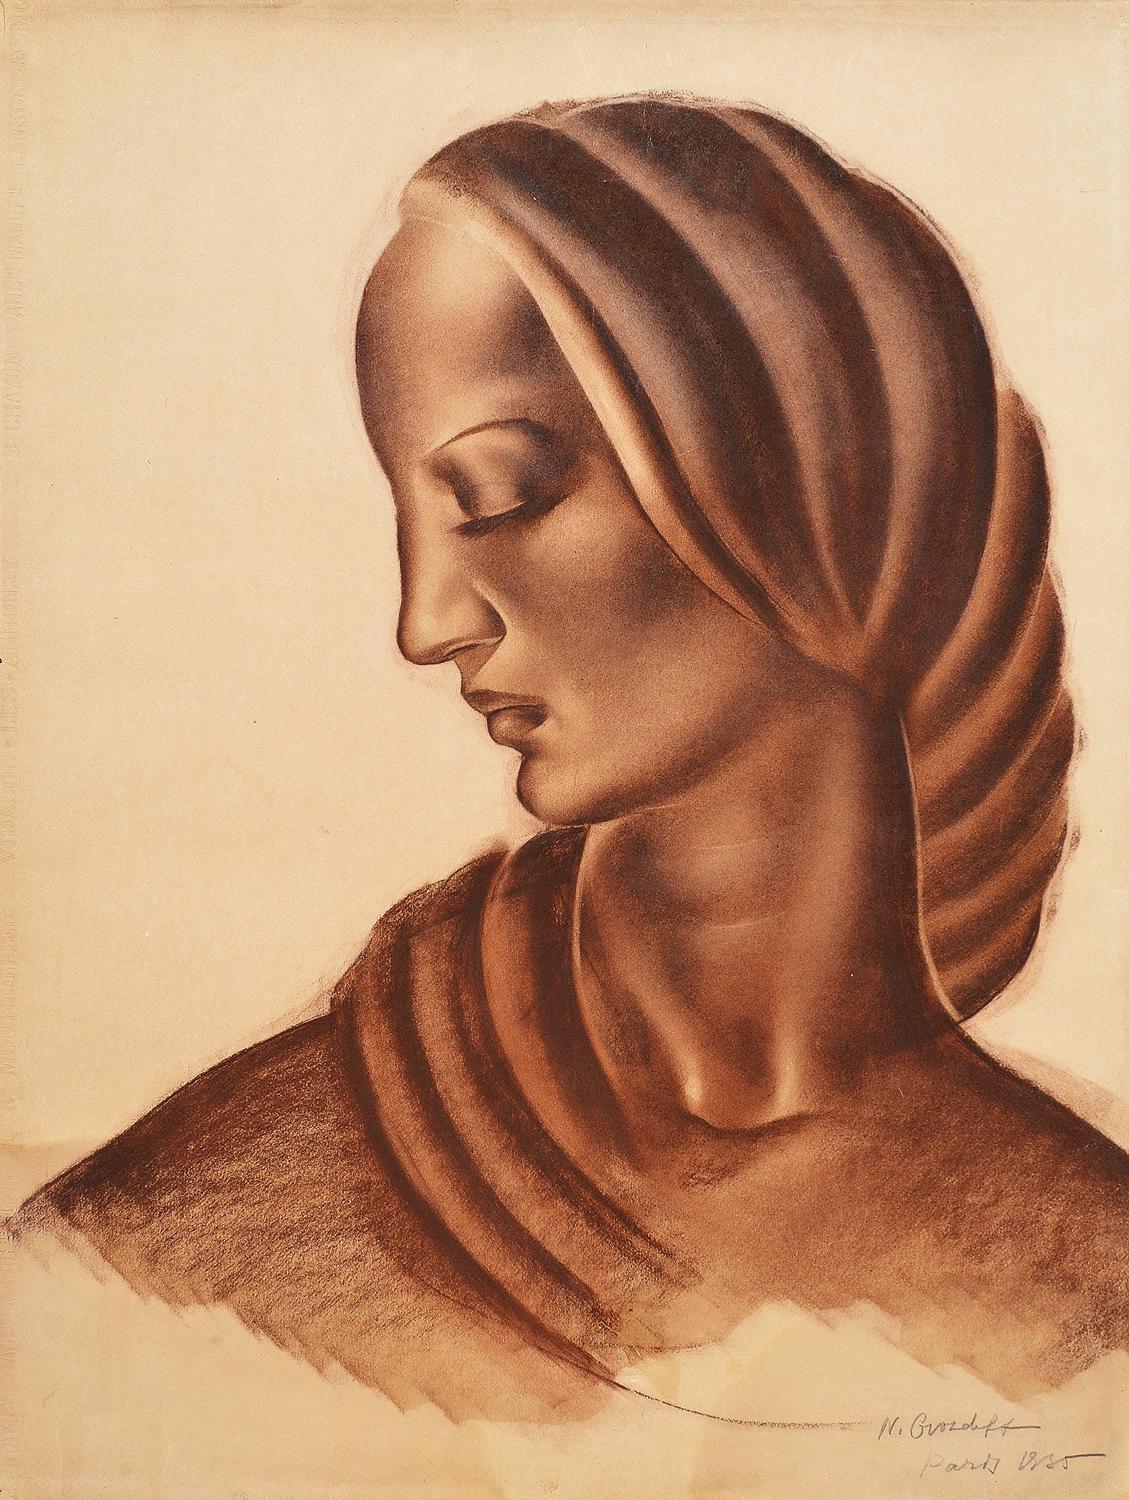 Portrait of a Lady, Charcoal Drawing, 20th Century Russian - Art by N. Grosdovv